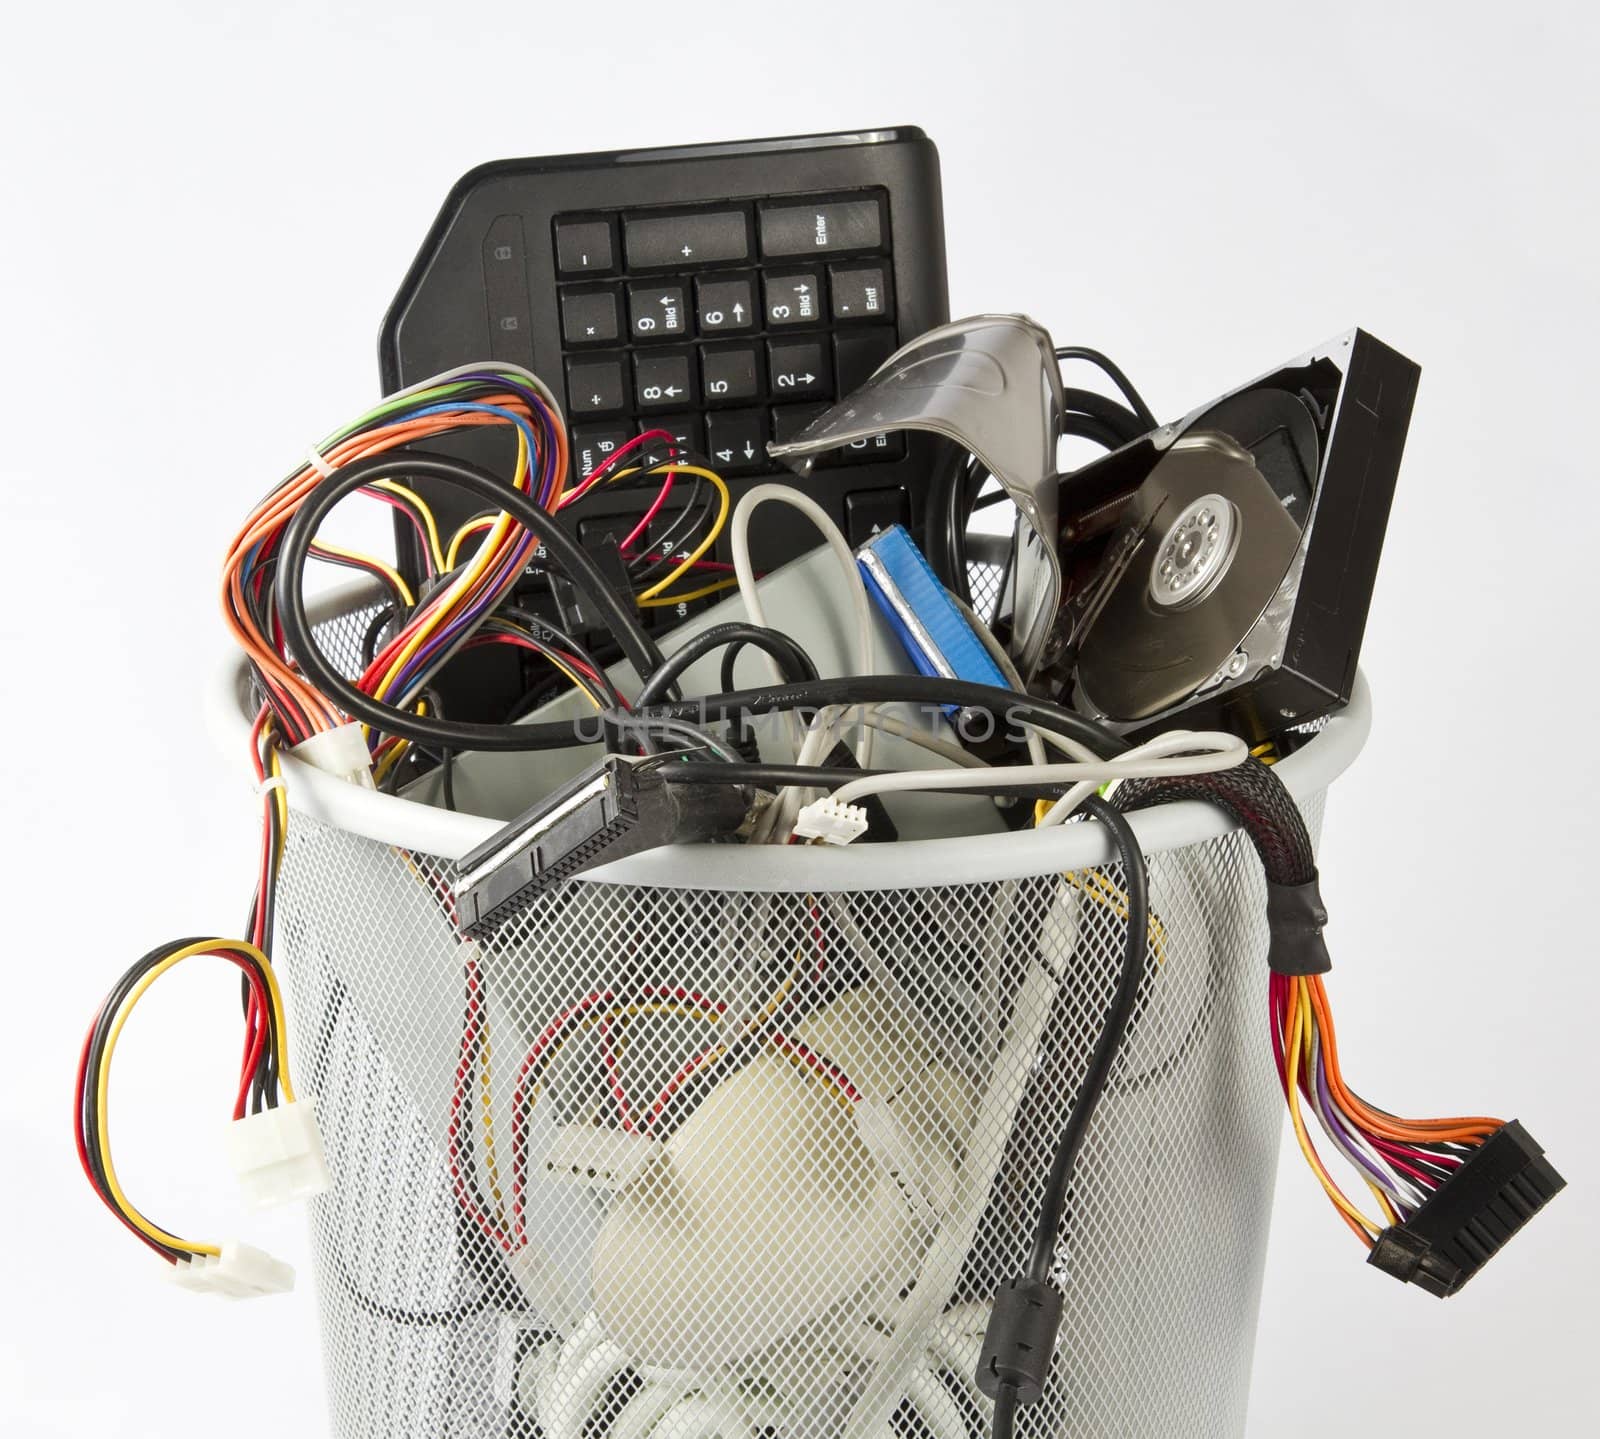 electronic parts from computers in trash can by gewoldi